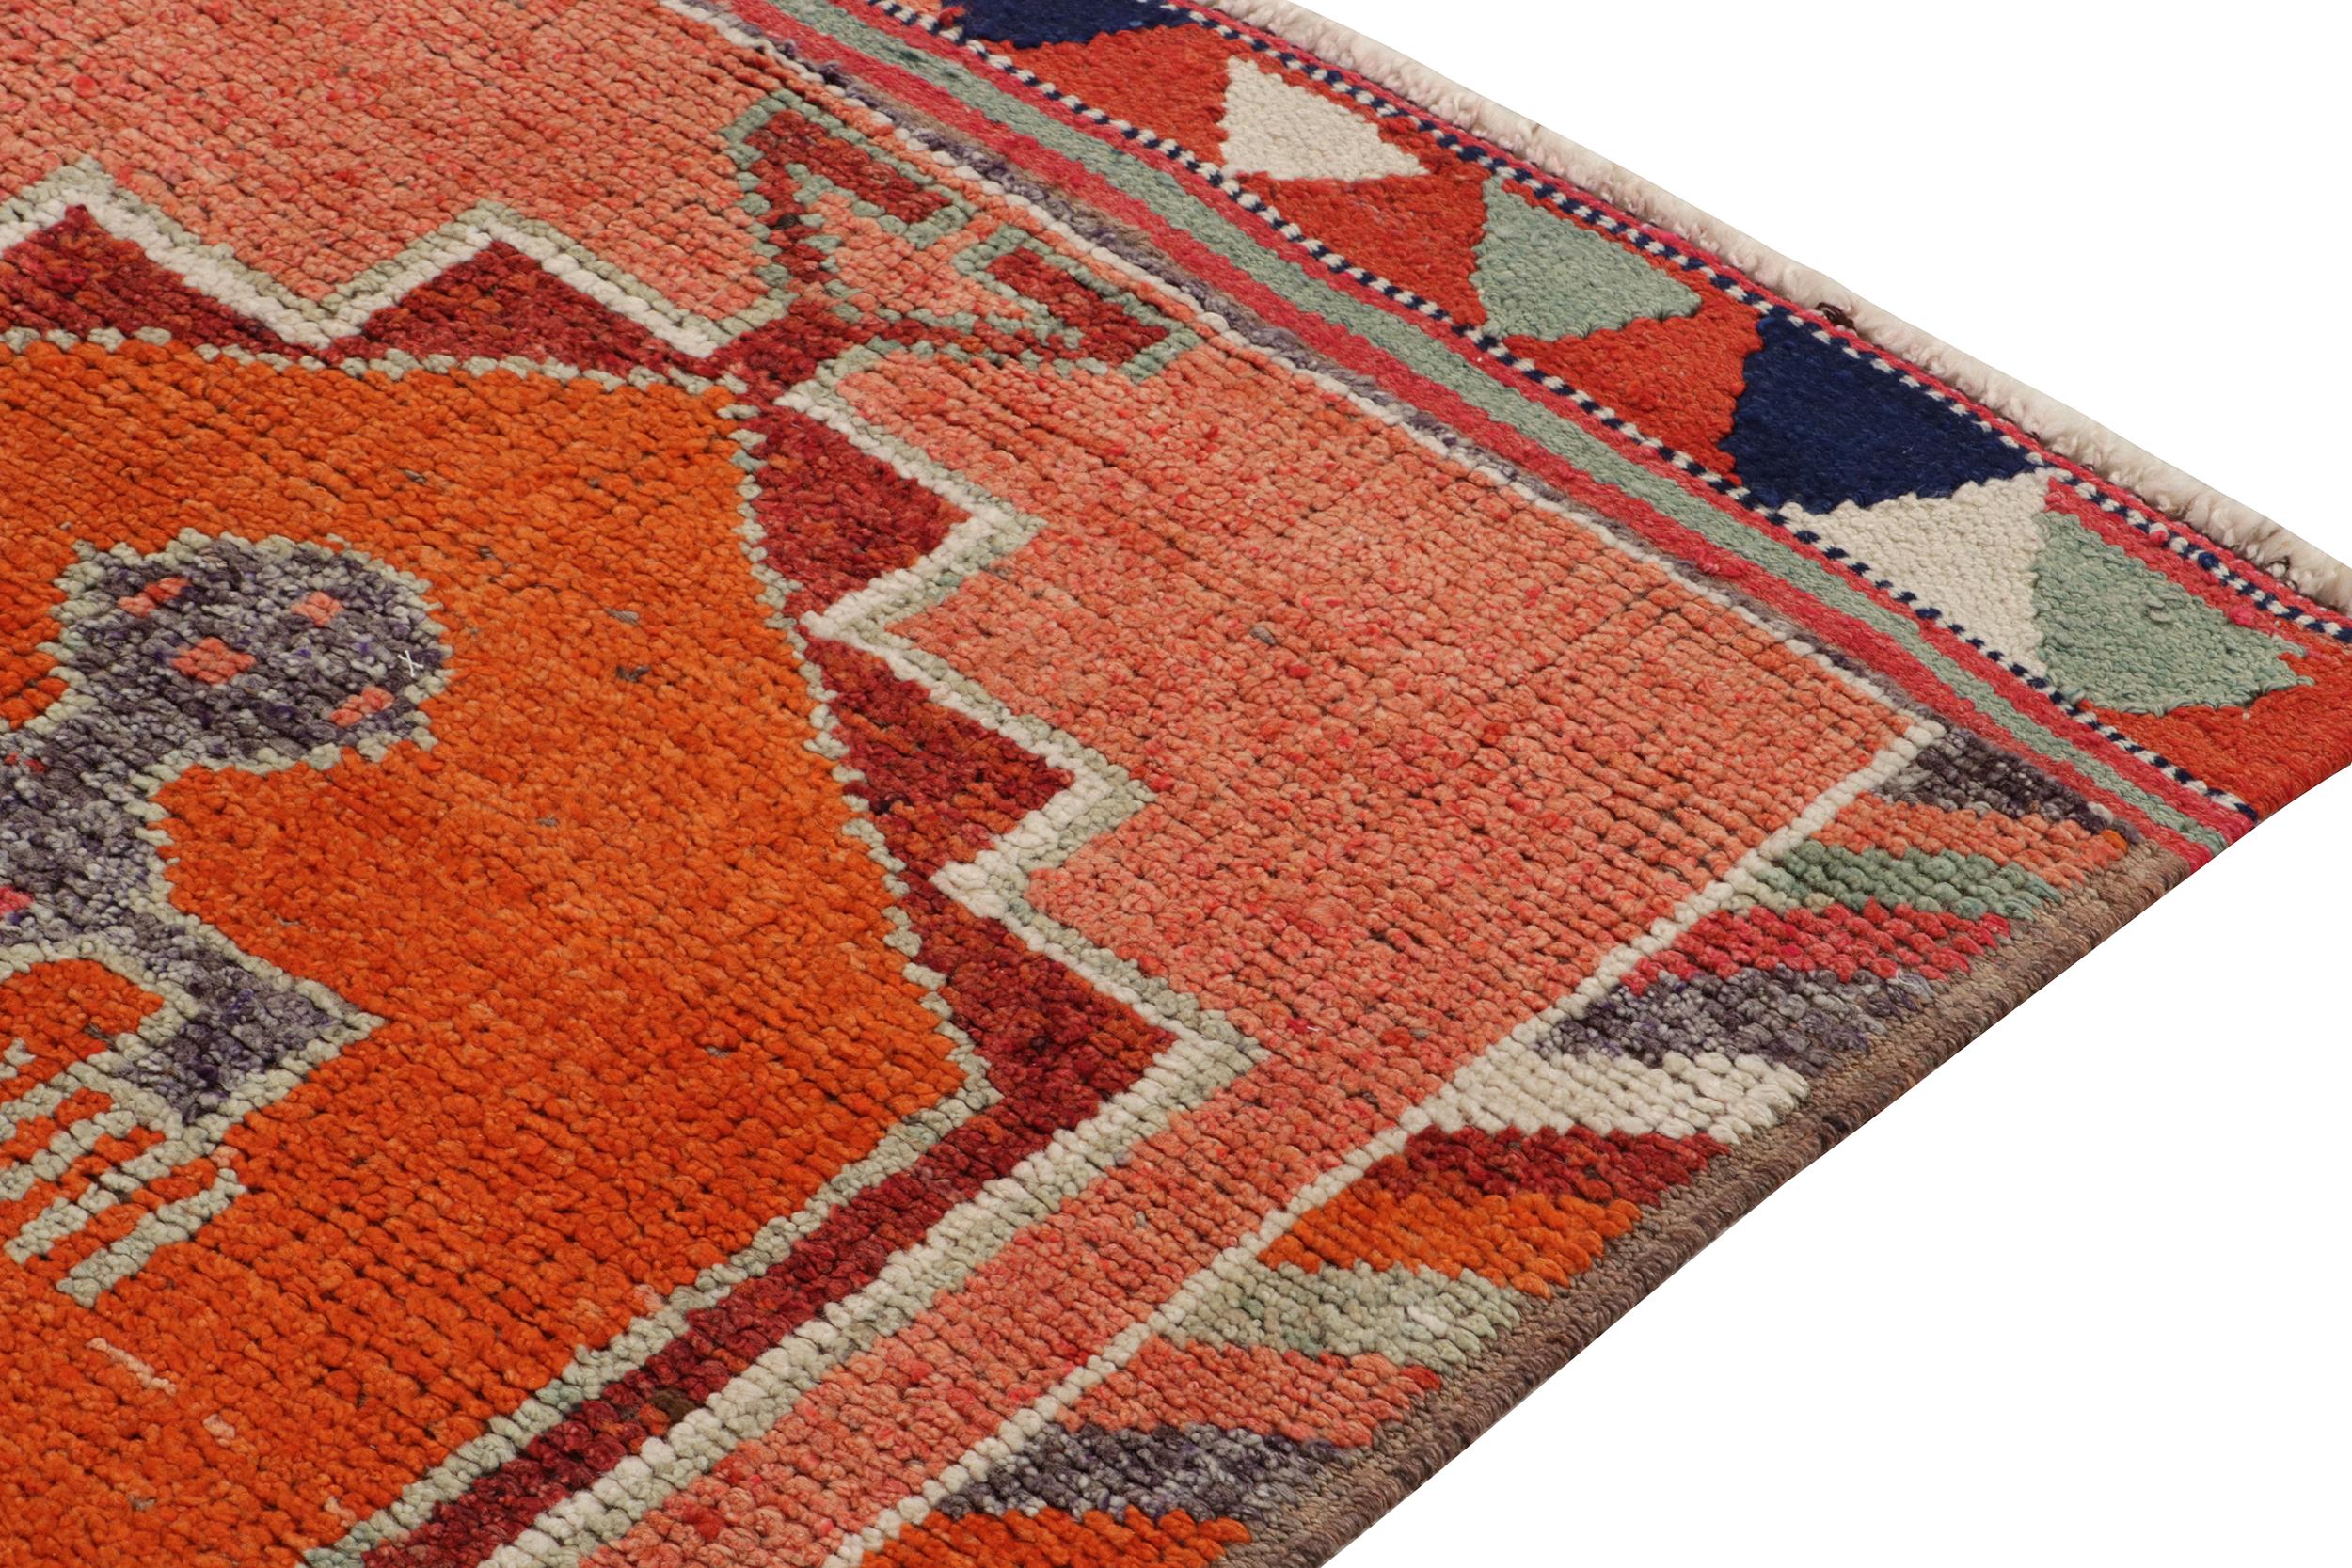 1950s Vintage Tribal Rug in Red, Orange, and Geometric Pattern by Rug & Kilim In Good Condition For Sale In Long Island City, NY